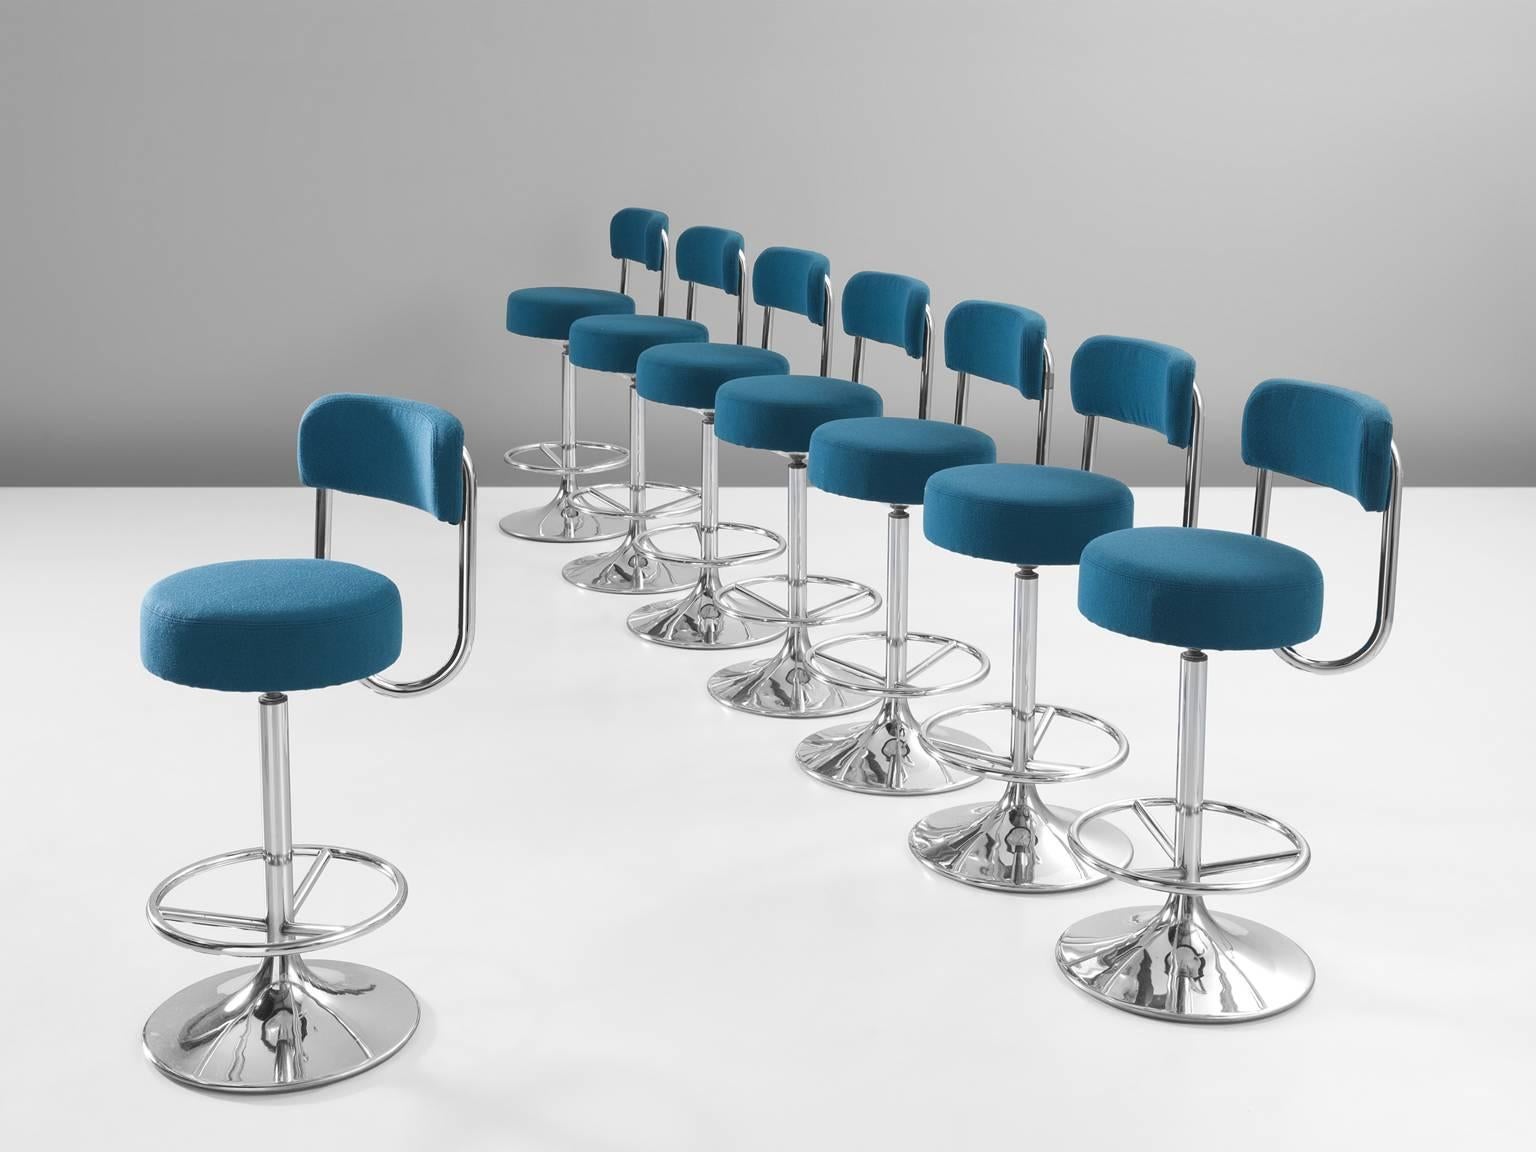 Bar stools, blue upholstery and metal, 1970s.

This set of eight bar stools by Johanson Design is both comfortable and functional at the same time. The chairs are small in width yet still support the back. The main feature of this design is the